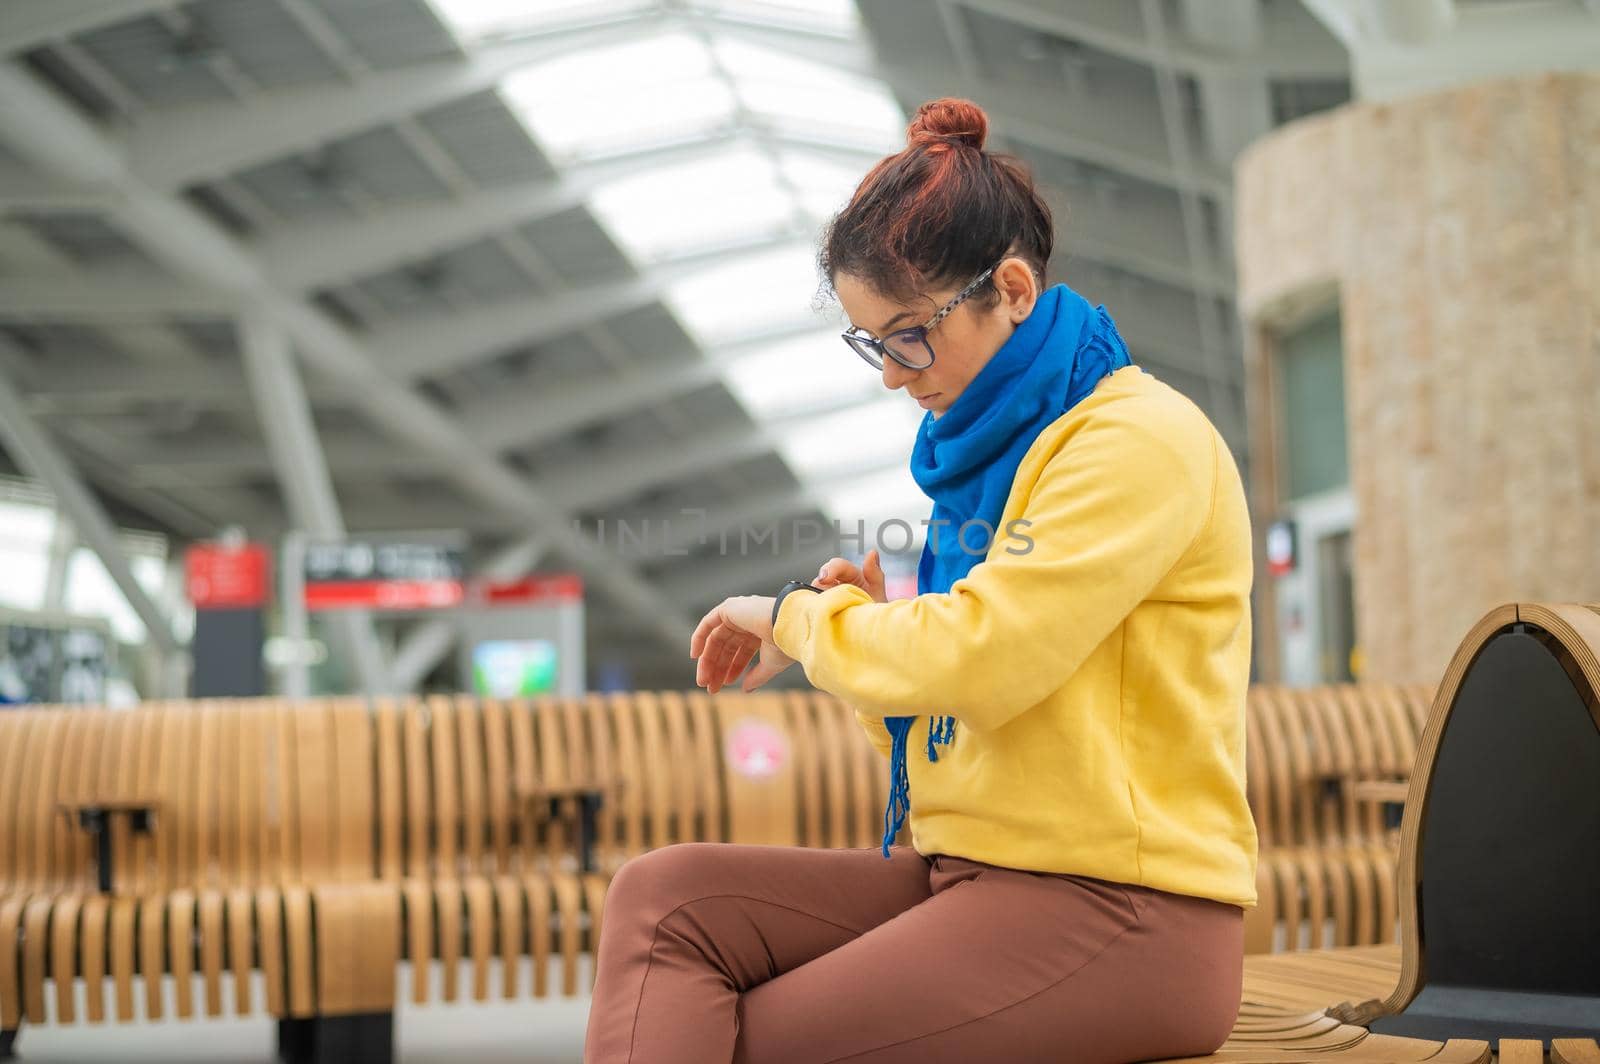 Caucasian woman sitting at the railway station and looking at smart watch. by mrwed54